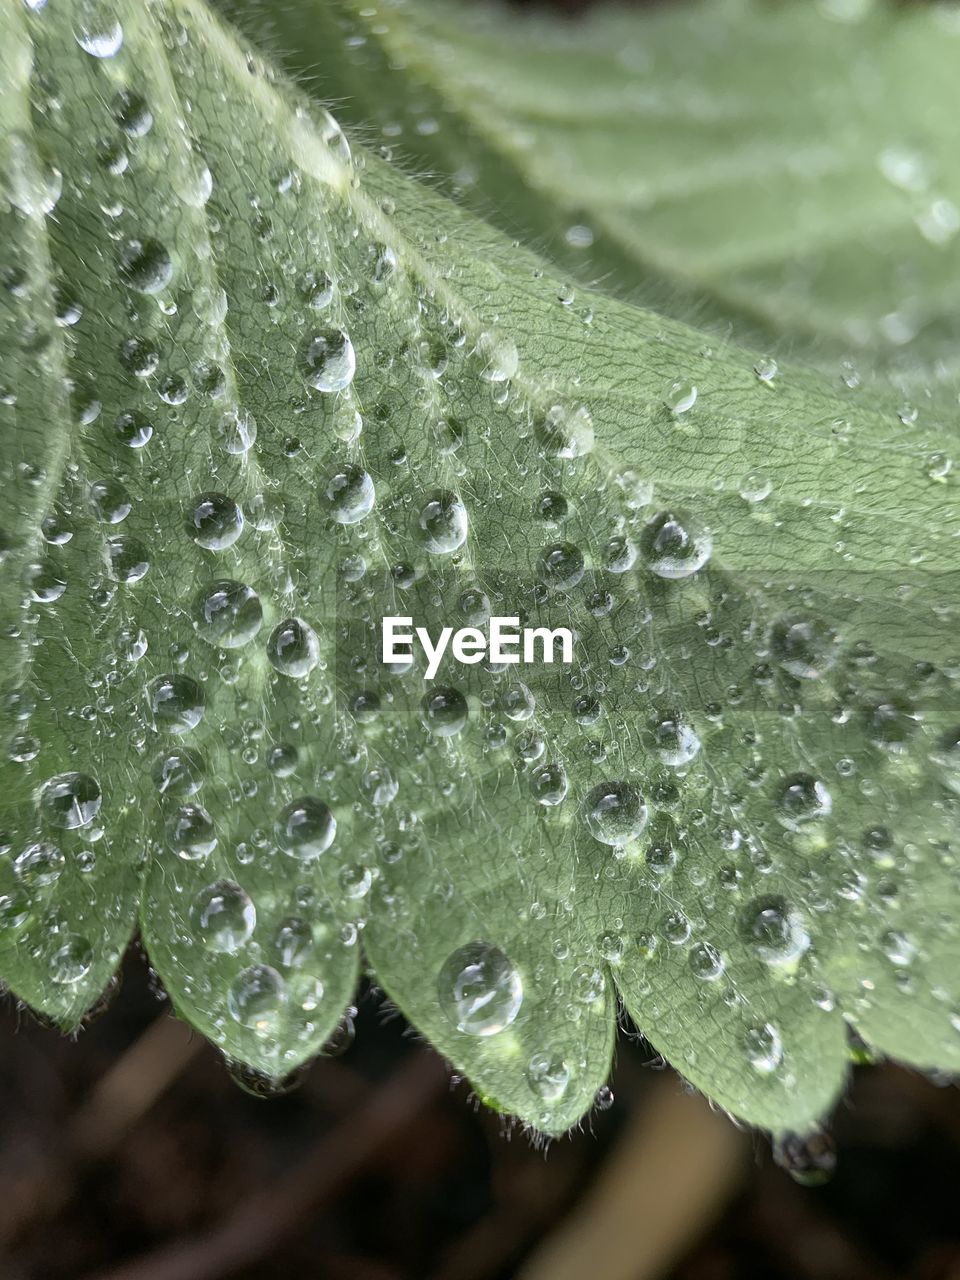 CLOSE-UP OF WATER DROPS ON PLANT LEAVES